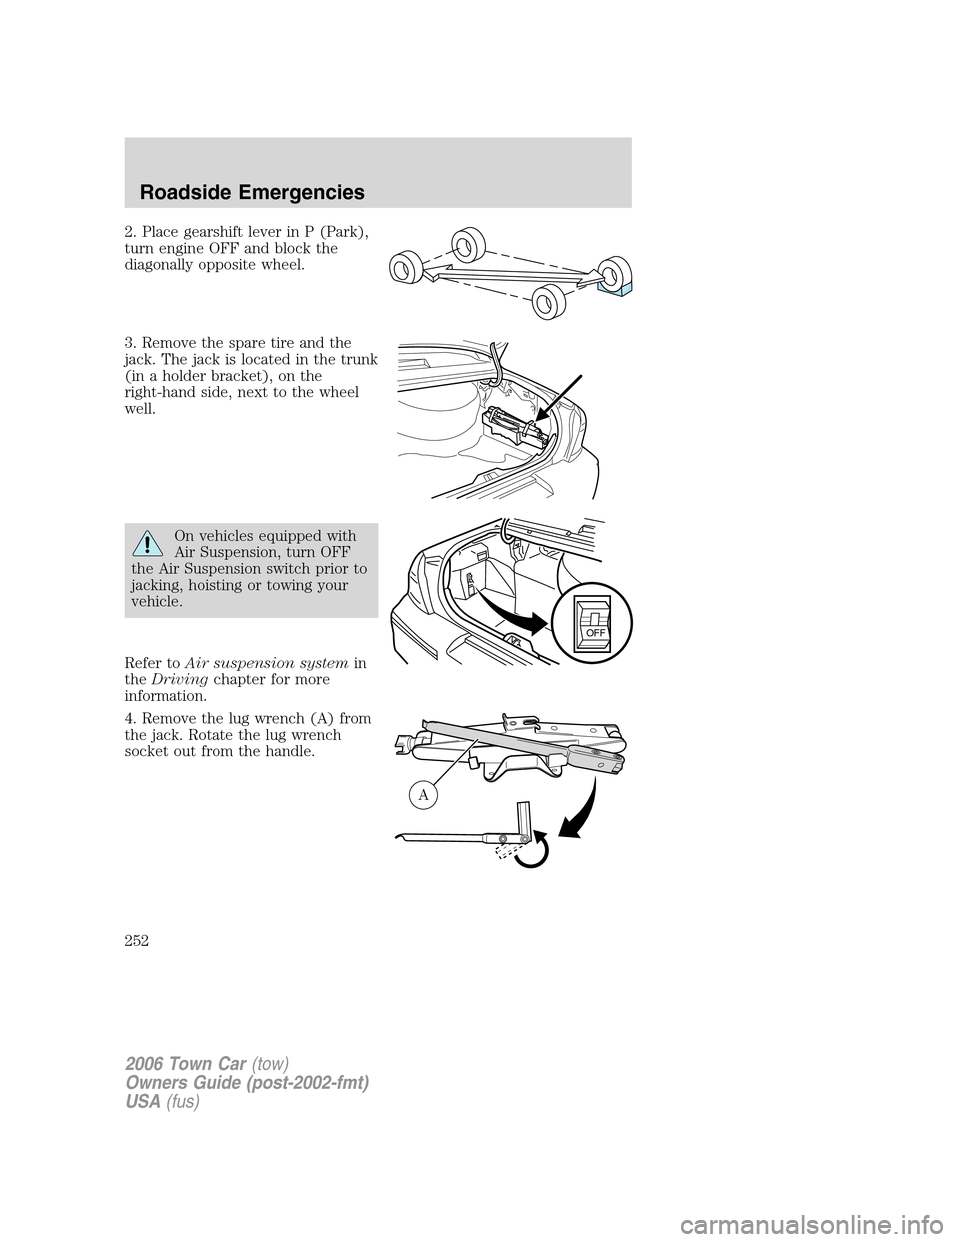 LINCOLN TOWN CAR 2006  Owners Manual 2. Place gearshift lever in P (Park),
turn engine OFF and block the
diagonally opposite wheel.
3. Remove the spare tire and the
jack. The jack is located in the trunk
(in a holder bracket), on the
rig